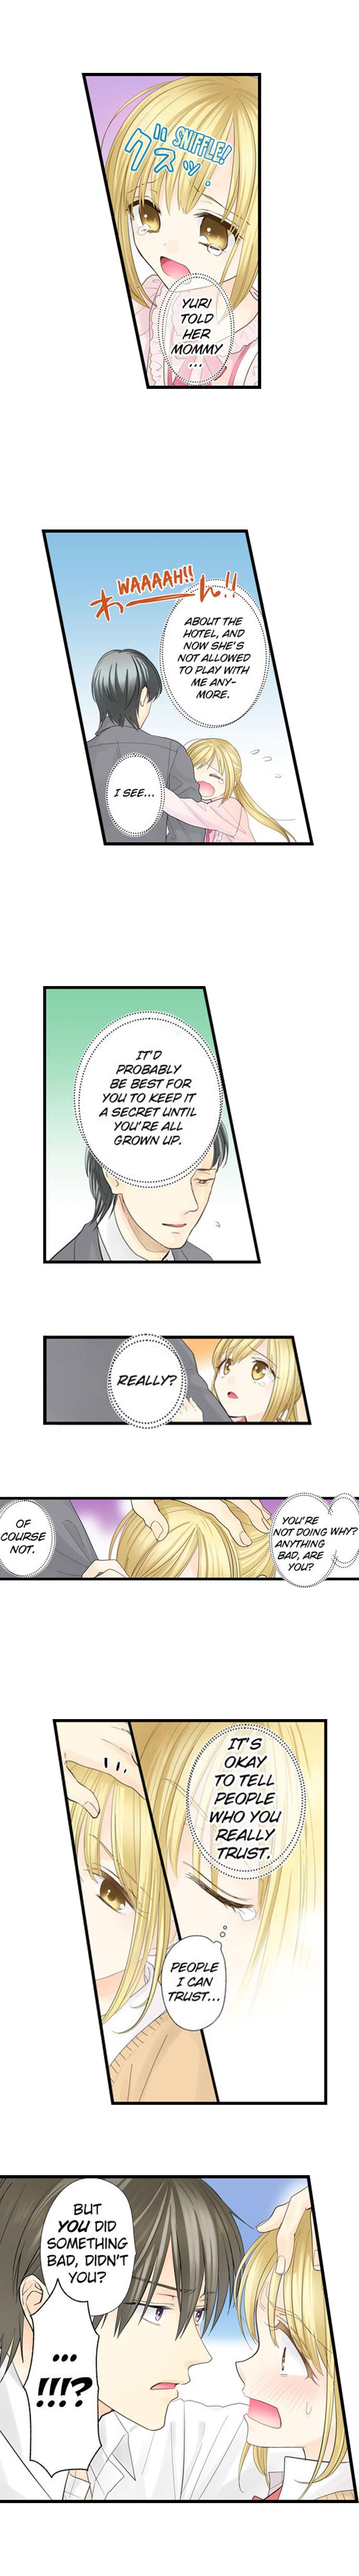 Running a Love Hotel with My Math Teacher - Chapter 5 Page 3